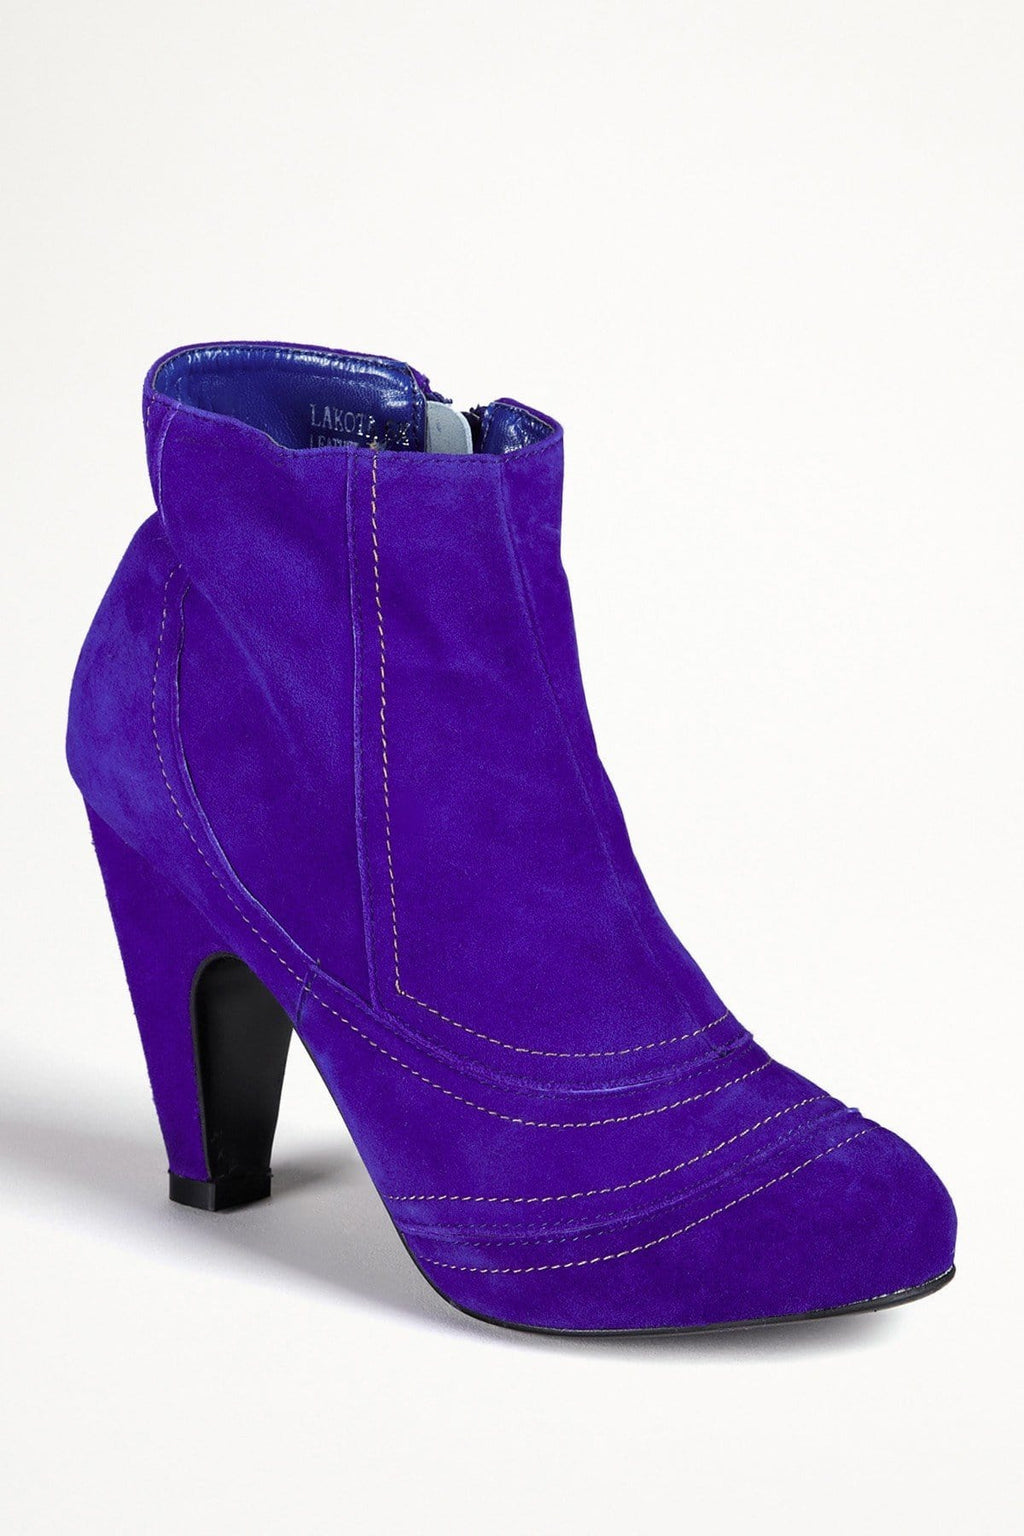 N.Y.L.A. SHOES BOOTIES N.Y.L.A. Shoes Lakota Women's Blue Suede Booties with 3" Heel and Side Zip